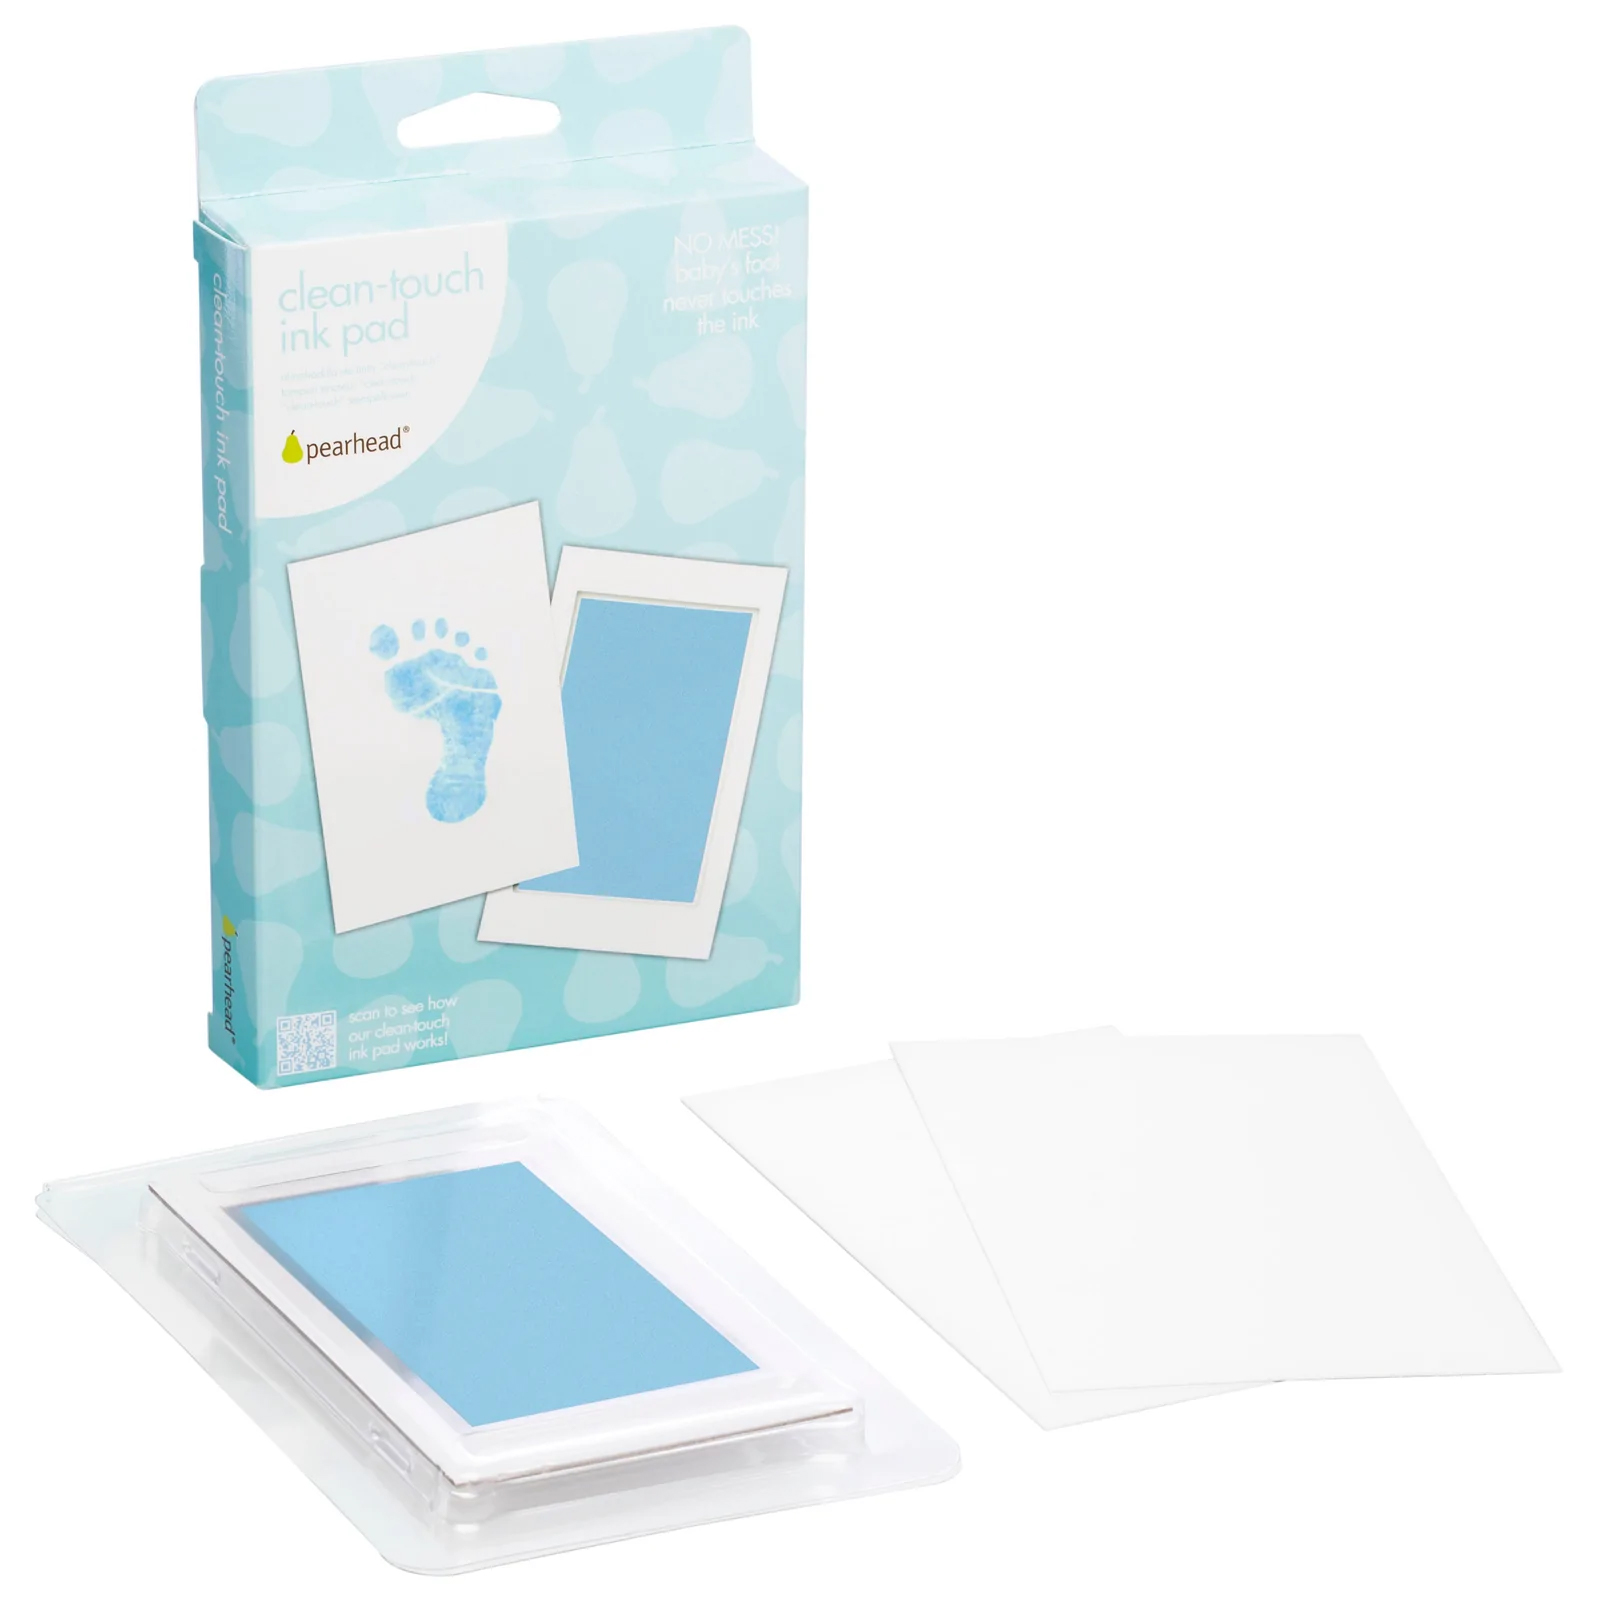 Clean Touch Ink Pad Blue